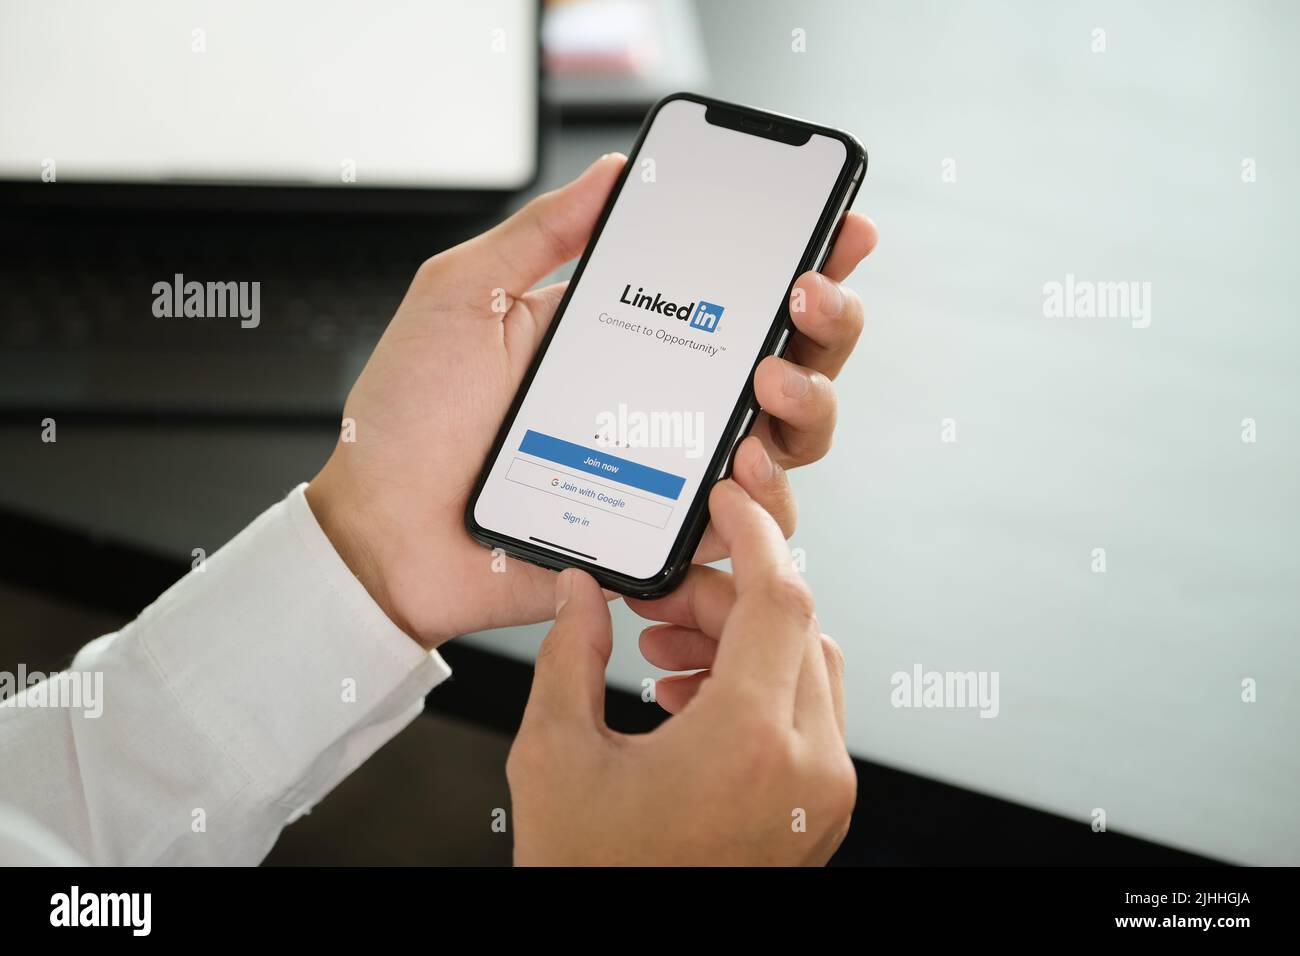 CHIANG MAI, THAILAND - April 06 2021 : LinkedIn application on the smartphone screen. LinkedIn is a business-oriented social networking service Stock Photo